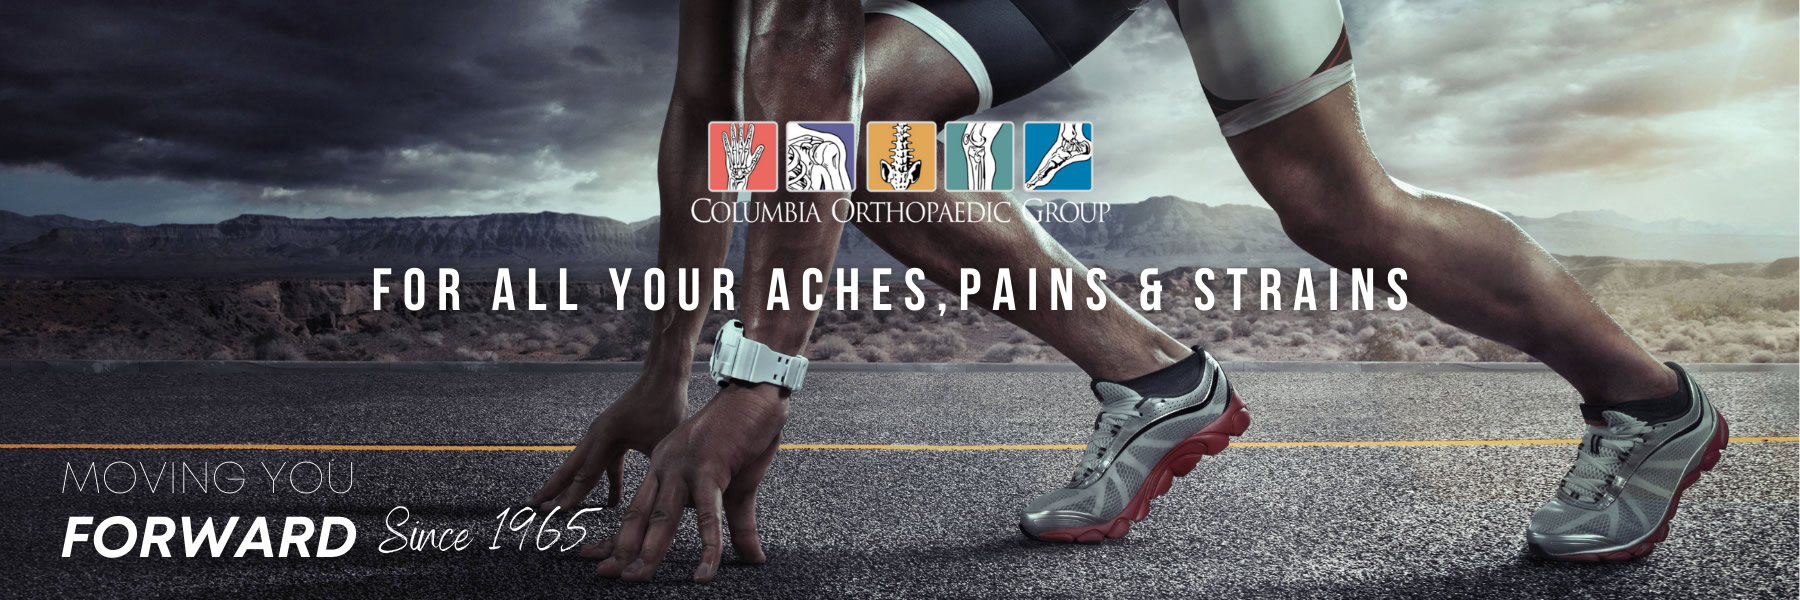 Patient Education Article - Columbia Orthopaedic Group - Patient